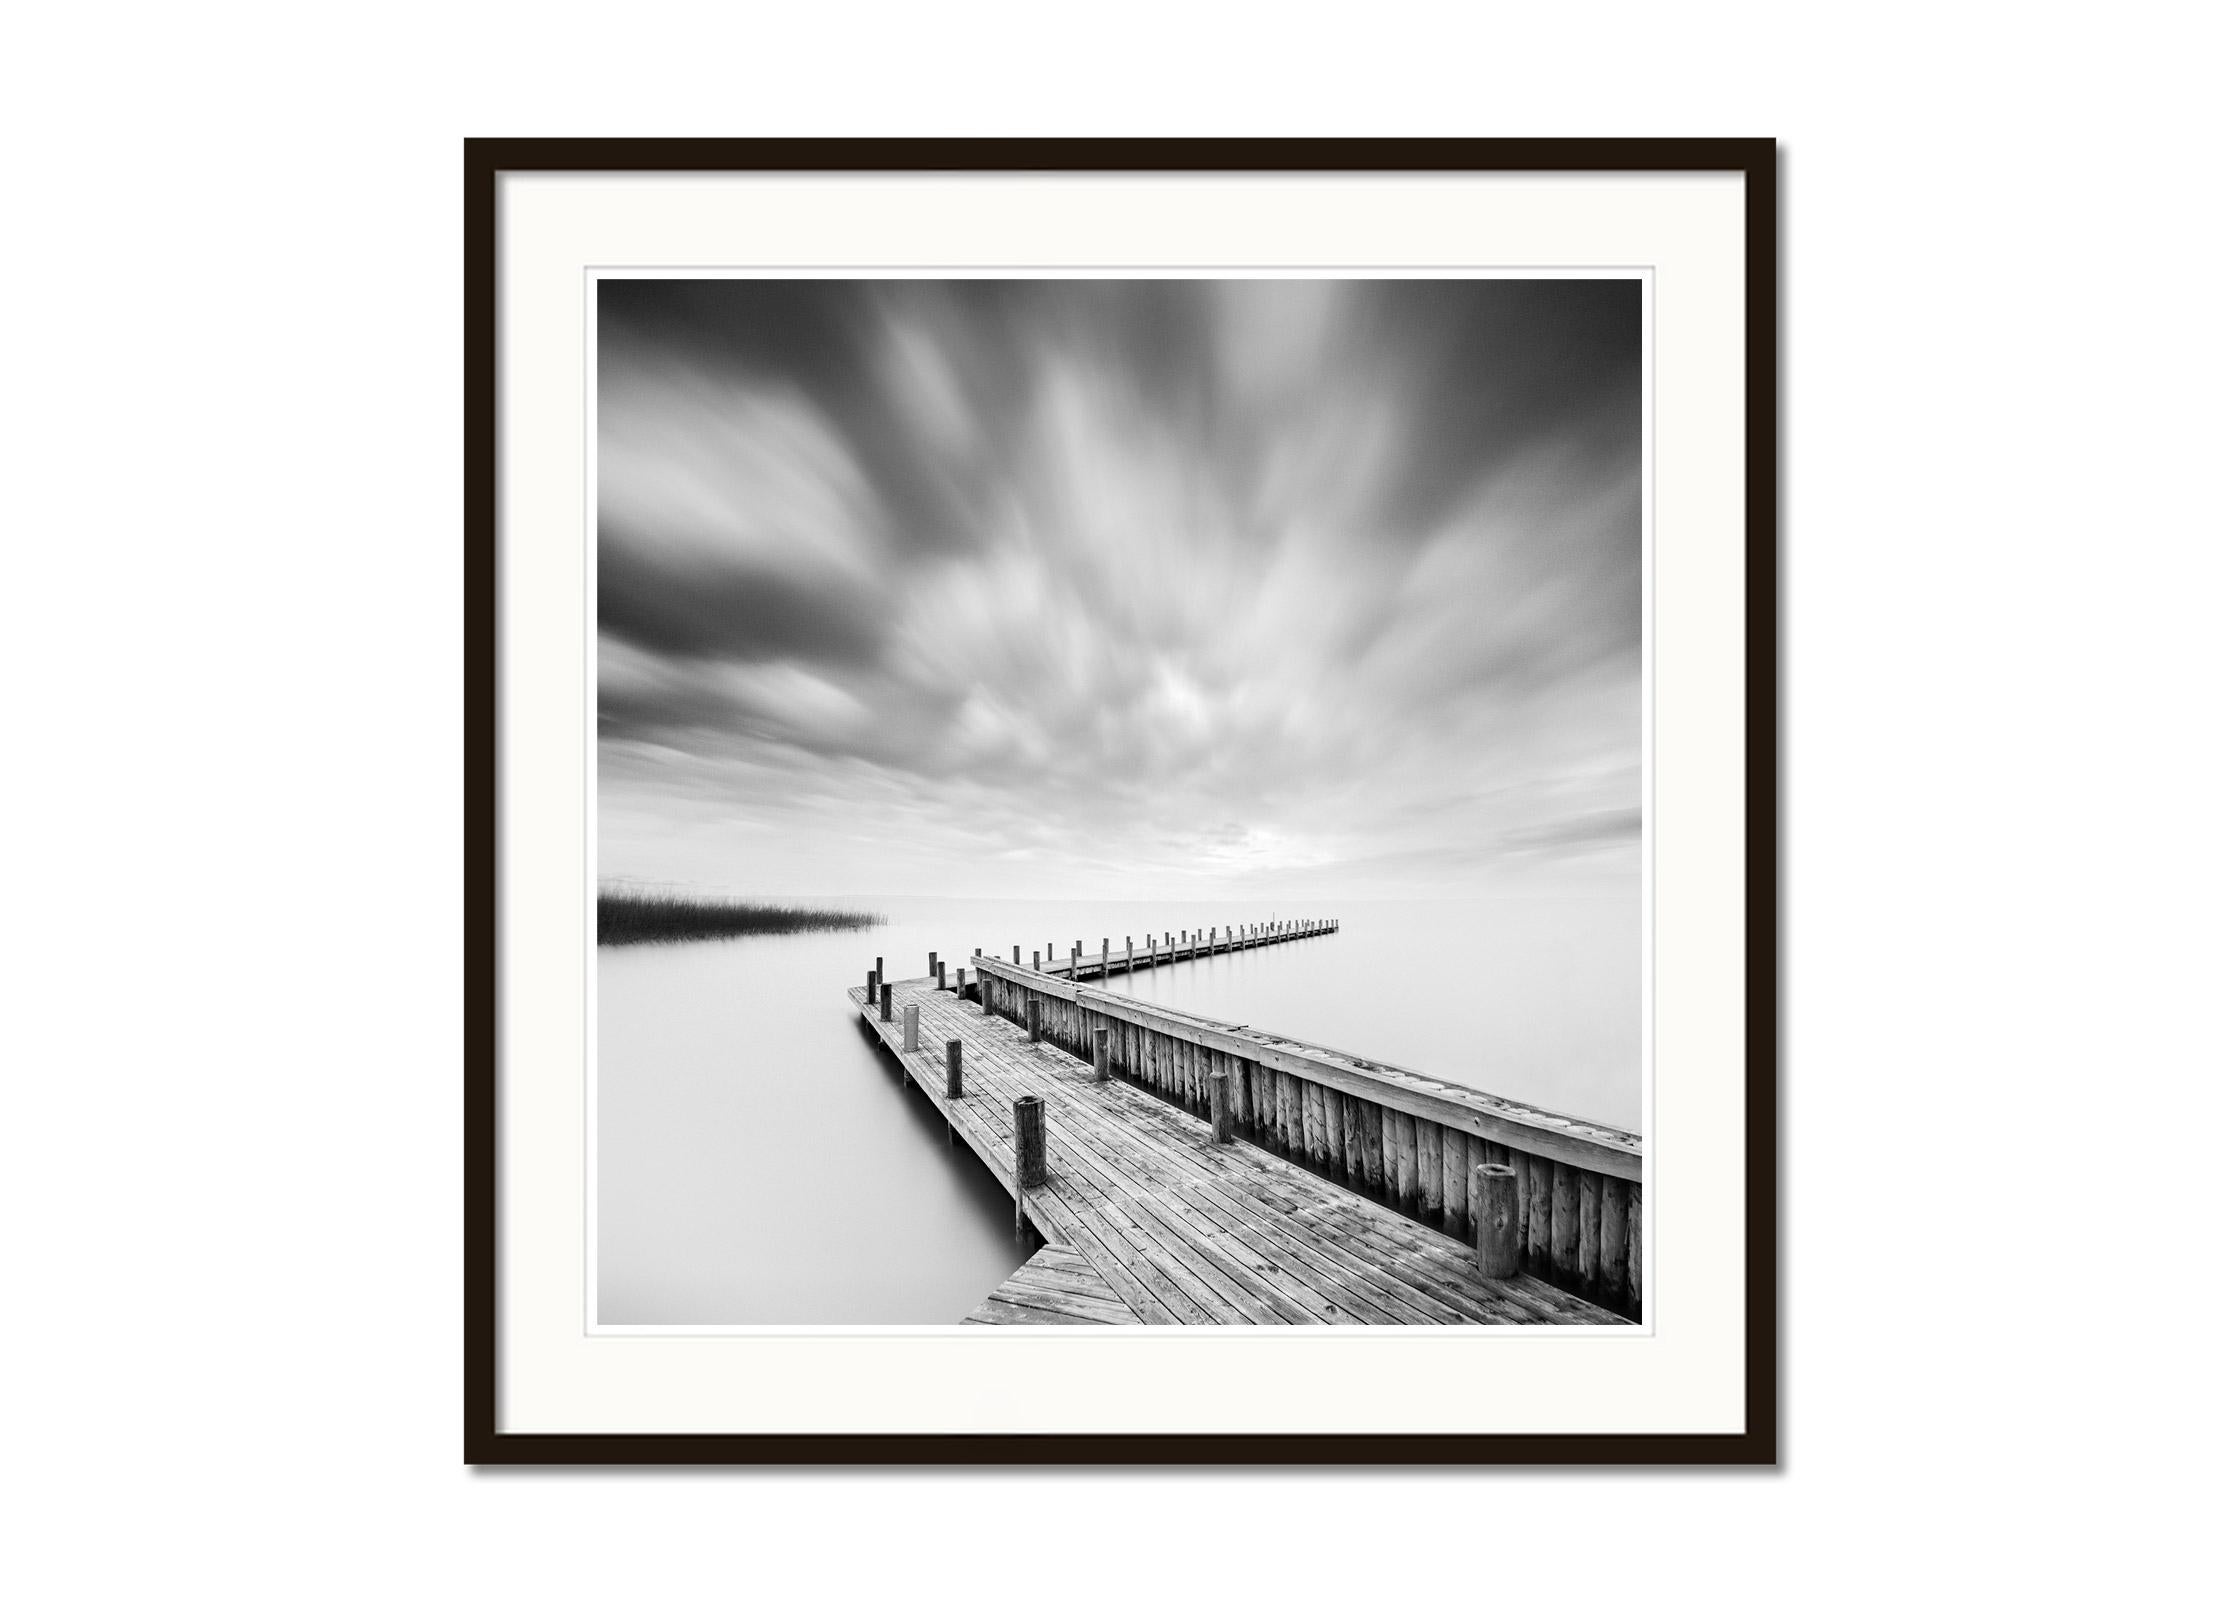 Wood Pier, Lake, Storm, Austria, black and white fine art photography landscapes - Gray Black and White Photograph by Gerald Berghammer